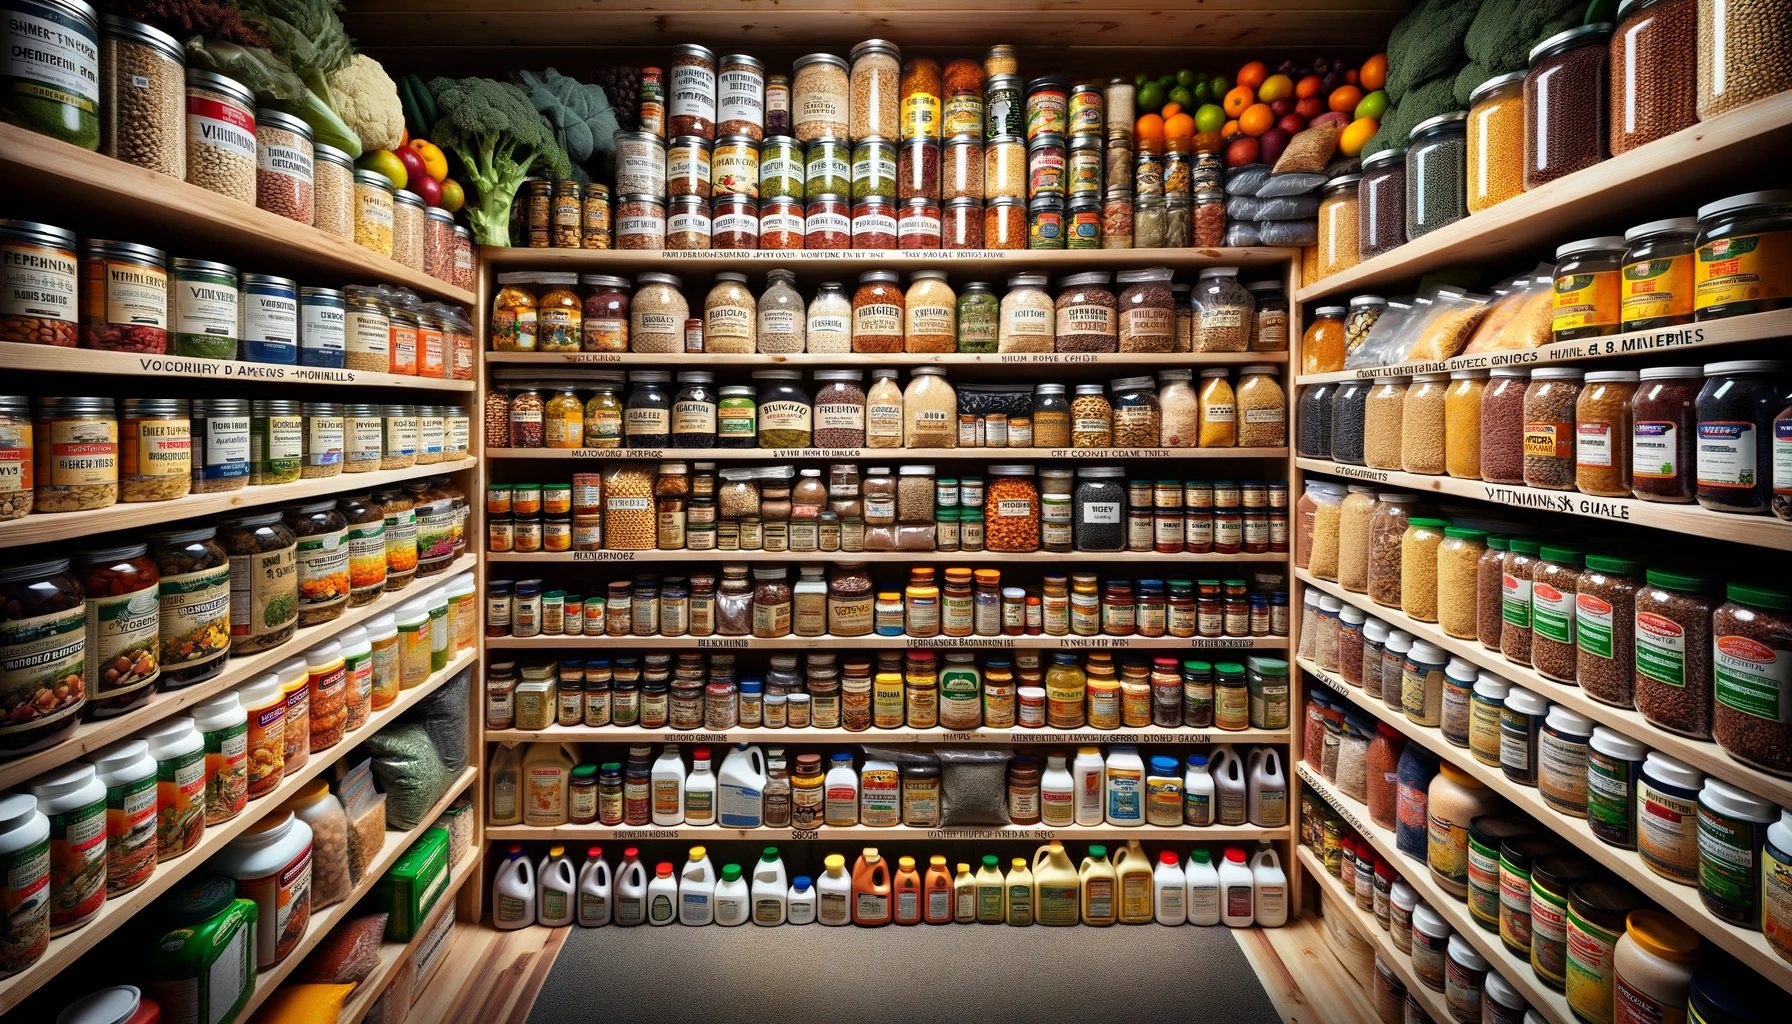 Expansive prepper's pantry showcasing long-term food storage with integrated vitamins and minerals among canned goods, dehydrated foods, grains, and legumes, featuring vacuum-sealed bags of dried fruits and vegetables, embodying a strategic approach to nutrition and preparedness